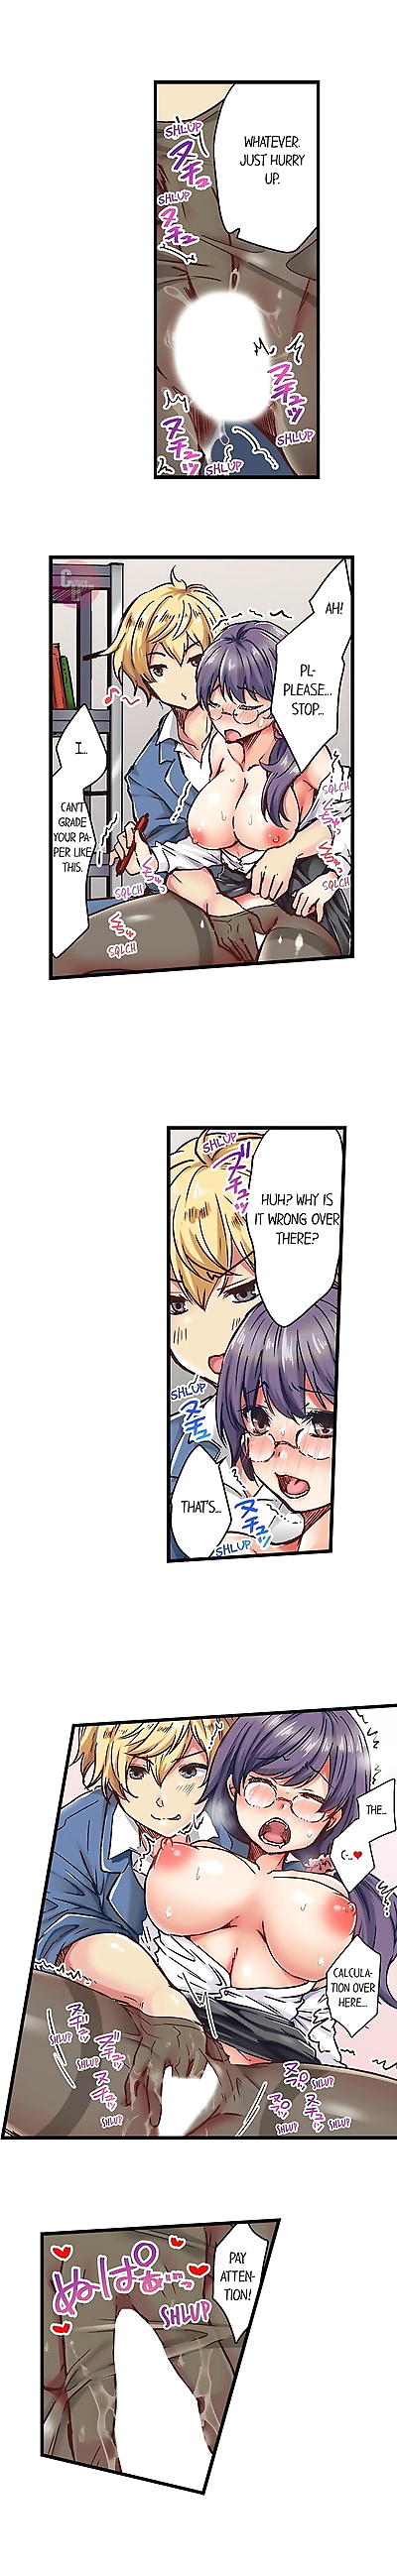 Shino Rewarding My Student with Sex Ch.6/? English Ongoing - part 2